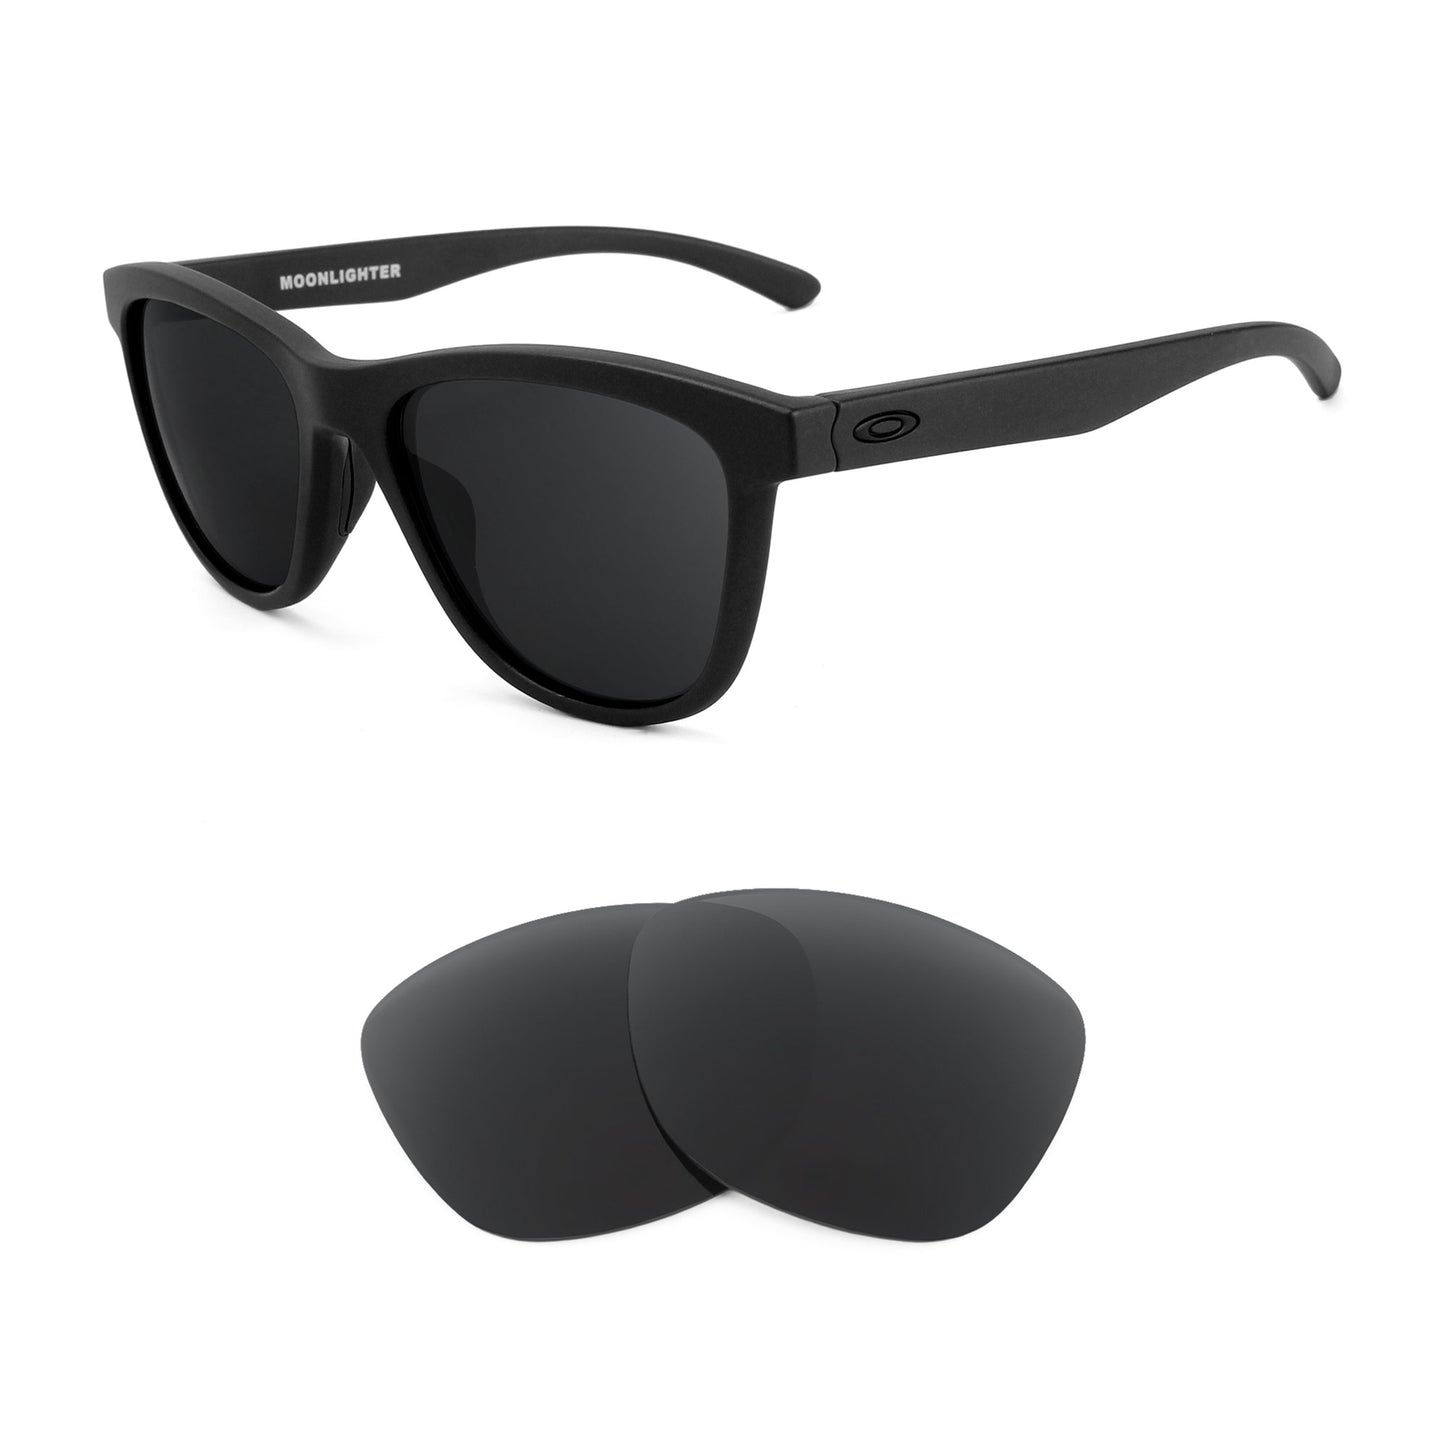 Oakley Moonlighter sunglasses with replacement lenses